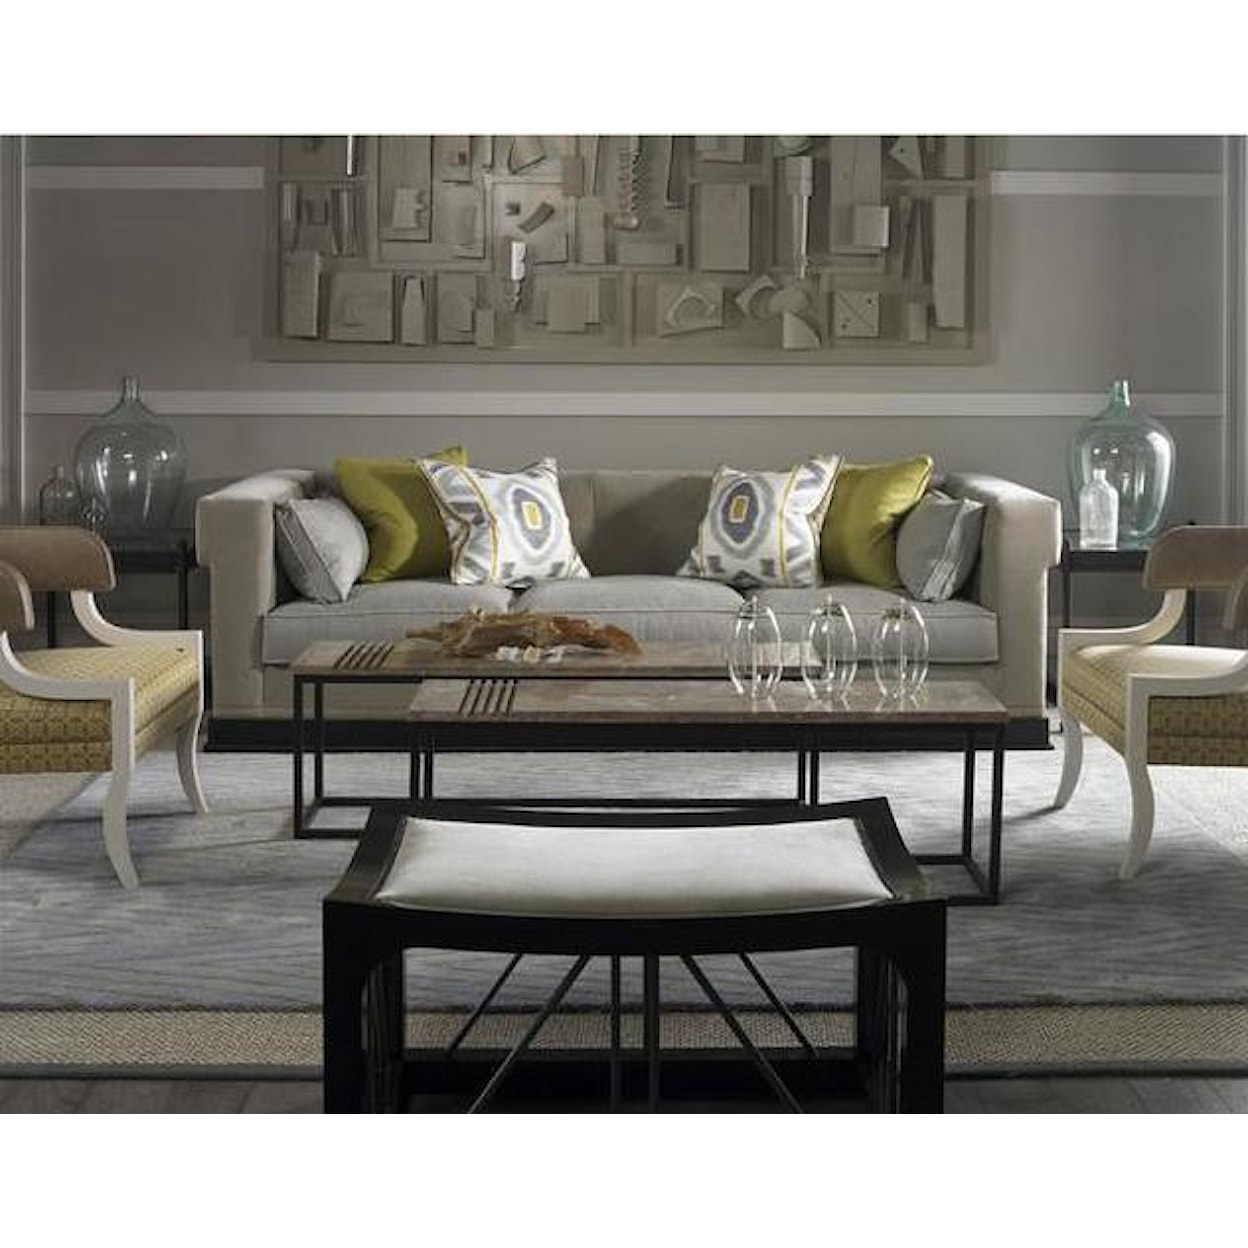 Vanguard Furniture Thom Filicia Home Collection Exposed Wood Chair